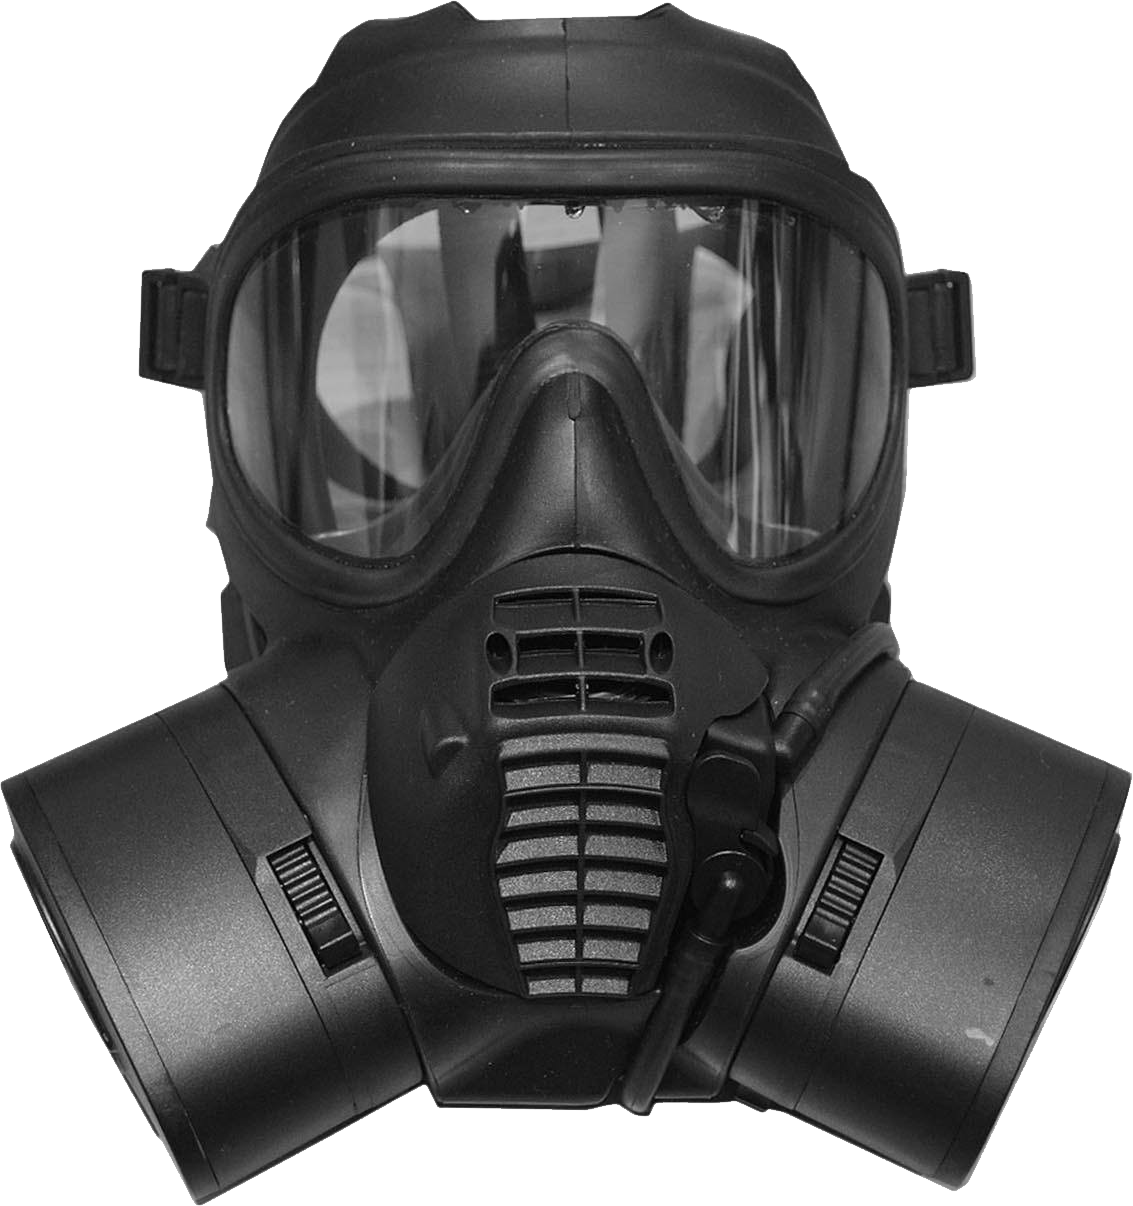 Download Gas Mask PNG Image for Free